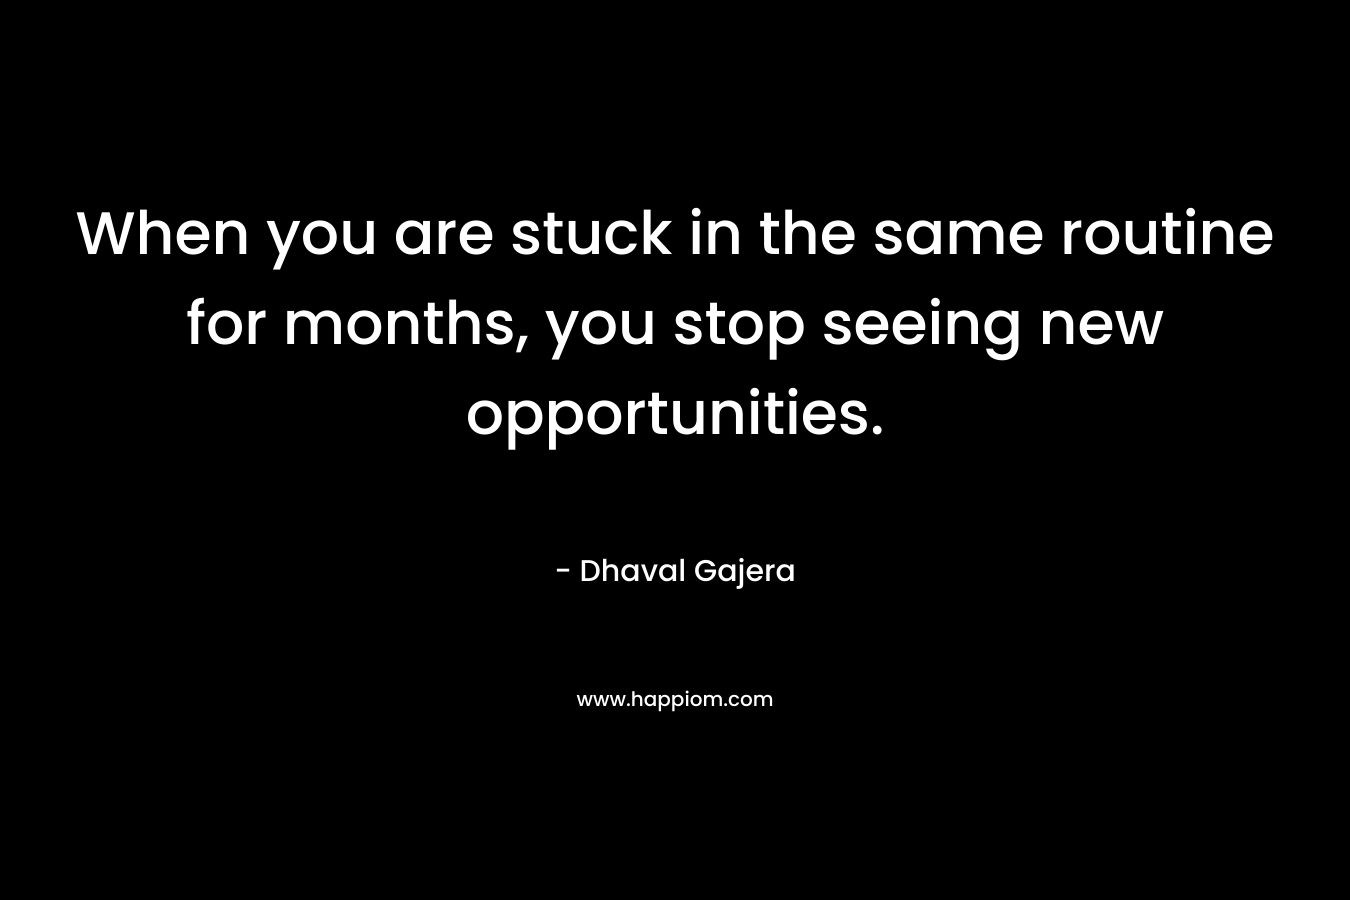 When you are stuck in the same routine for months, you stop seeing new opportunities. – Dhaval Gajera